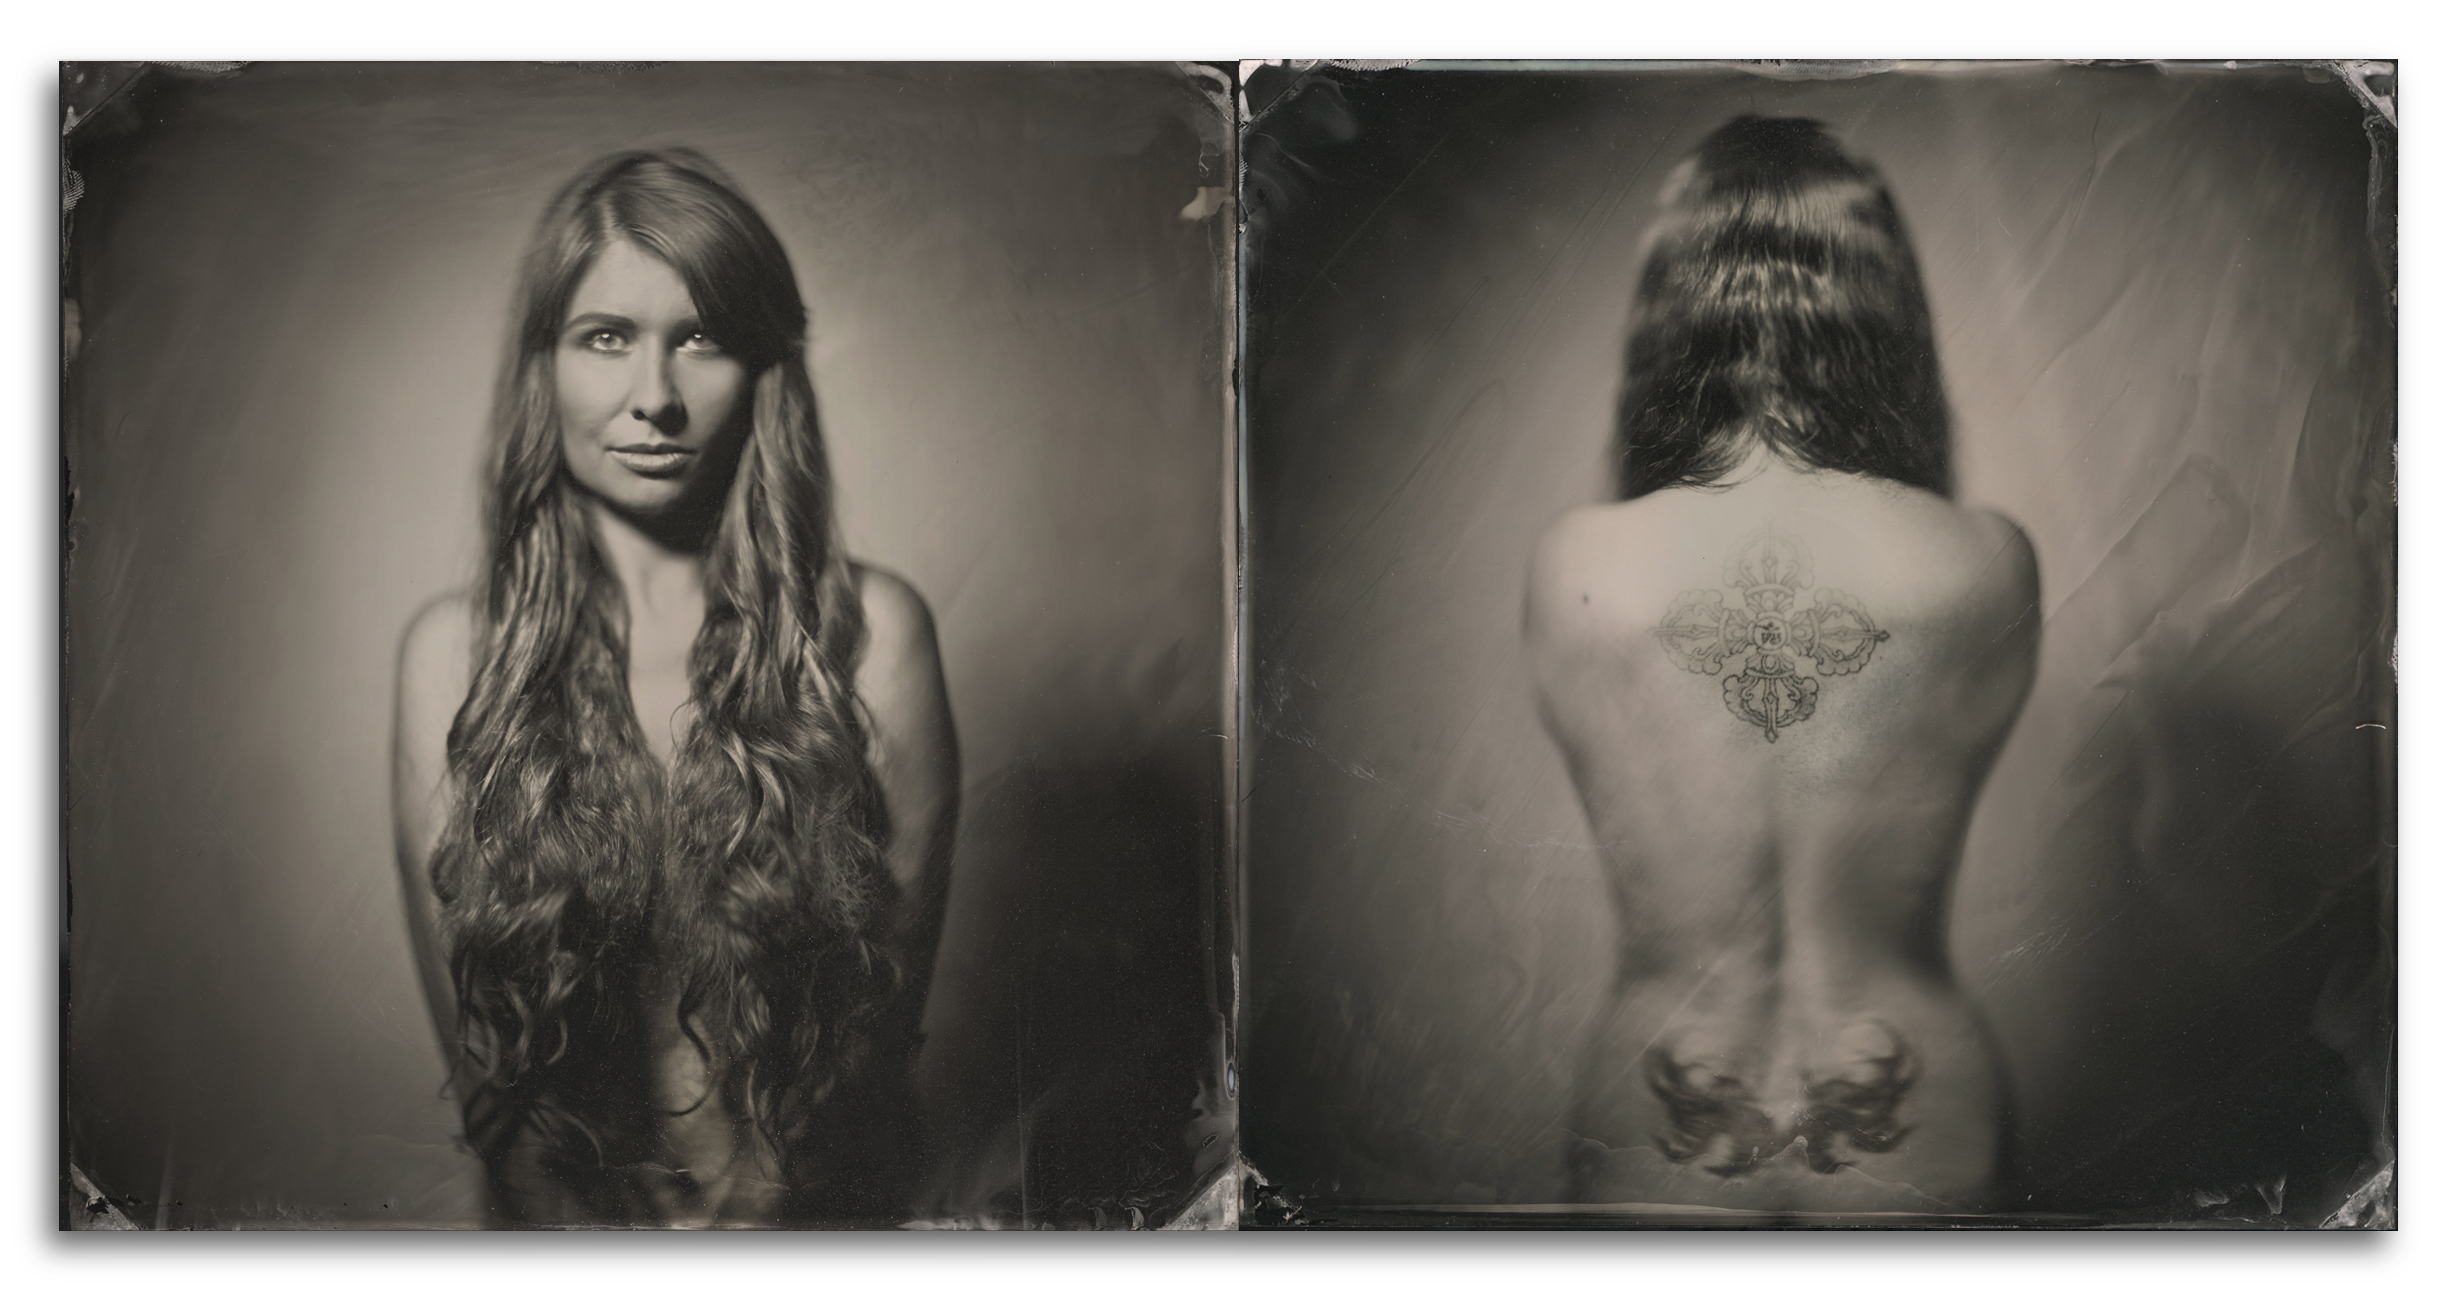 Dave King – Quarter Plate Black Perspex Ambrotype